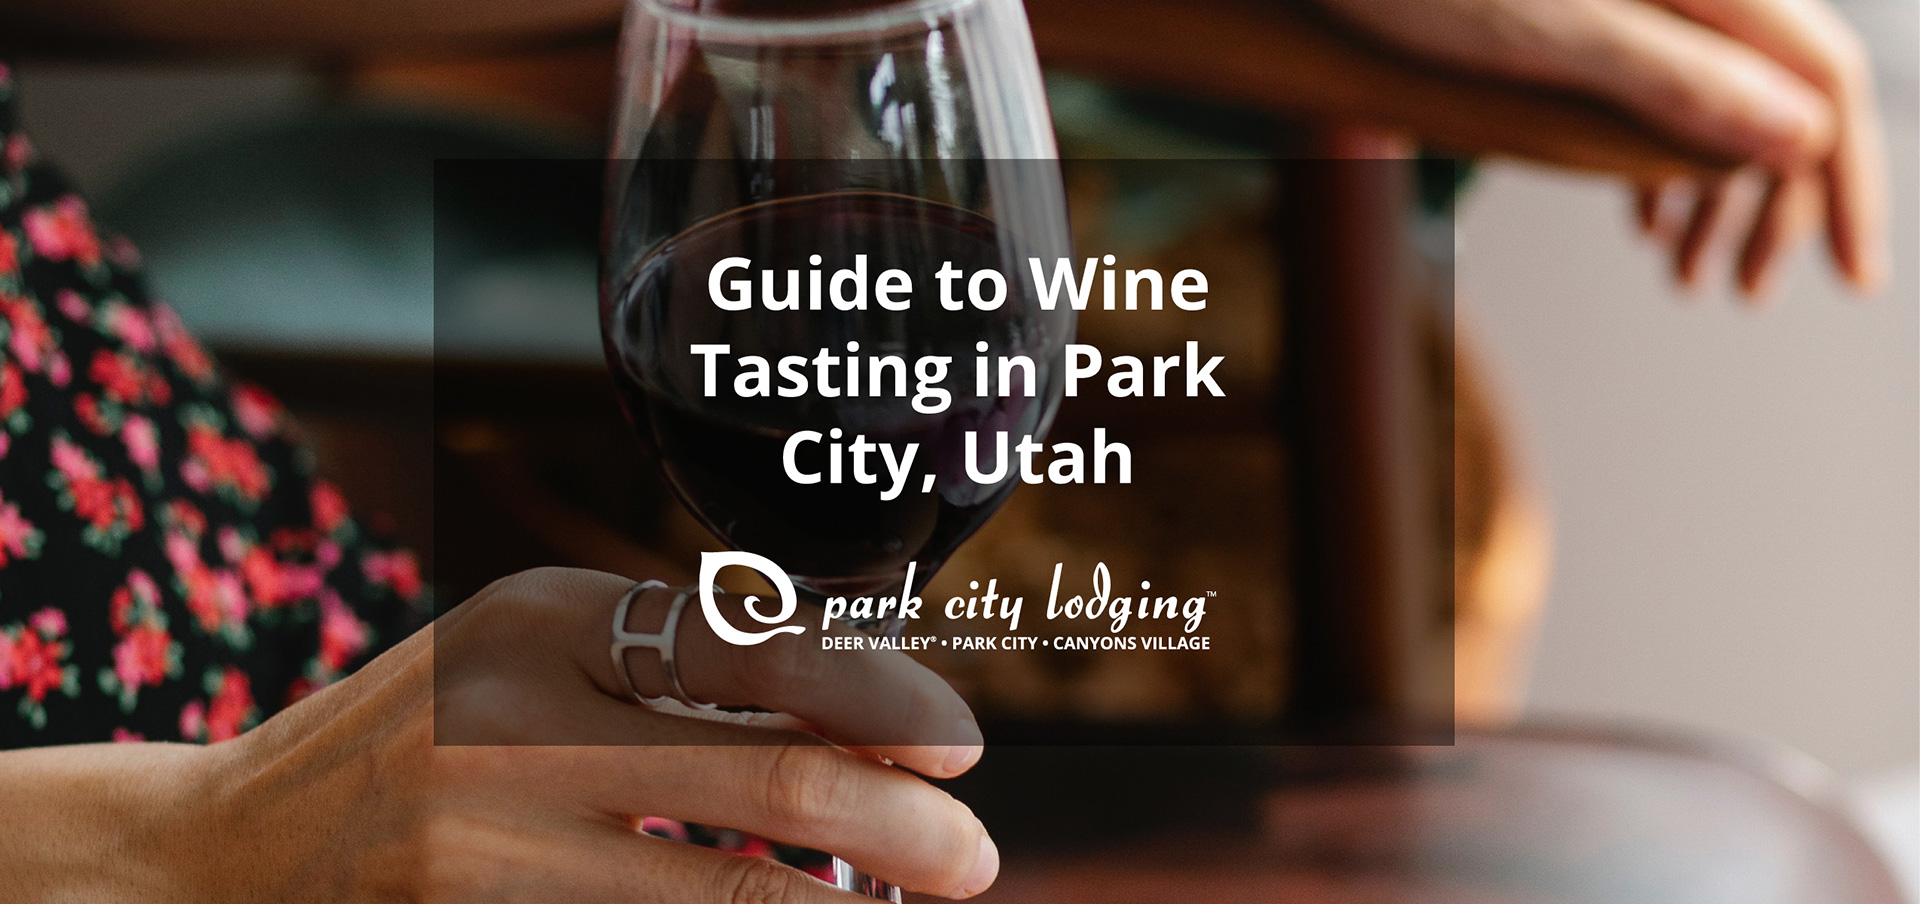 Guide to Wine Tasting in Park City